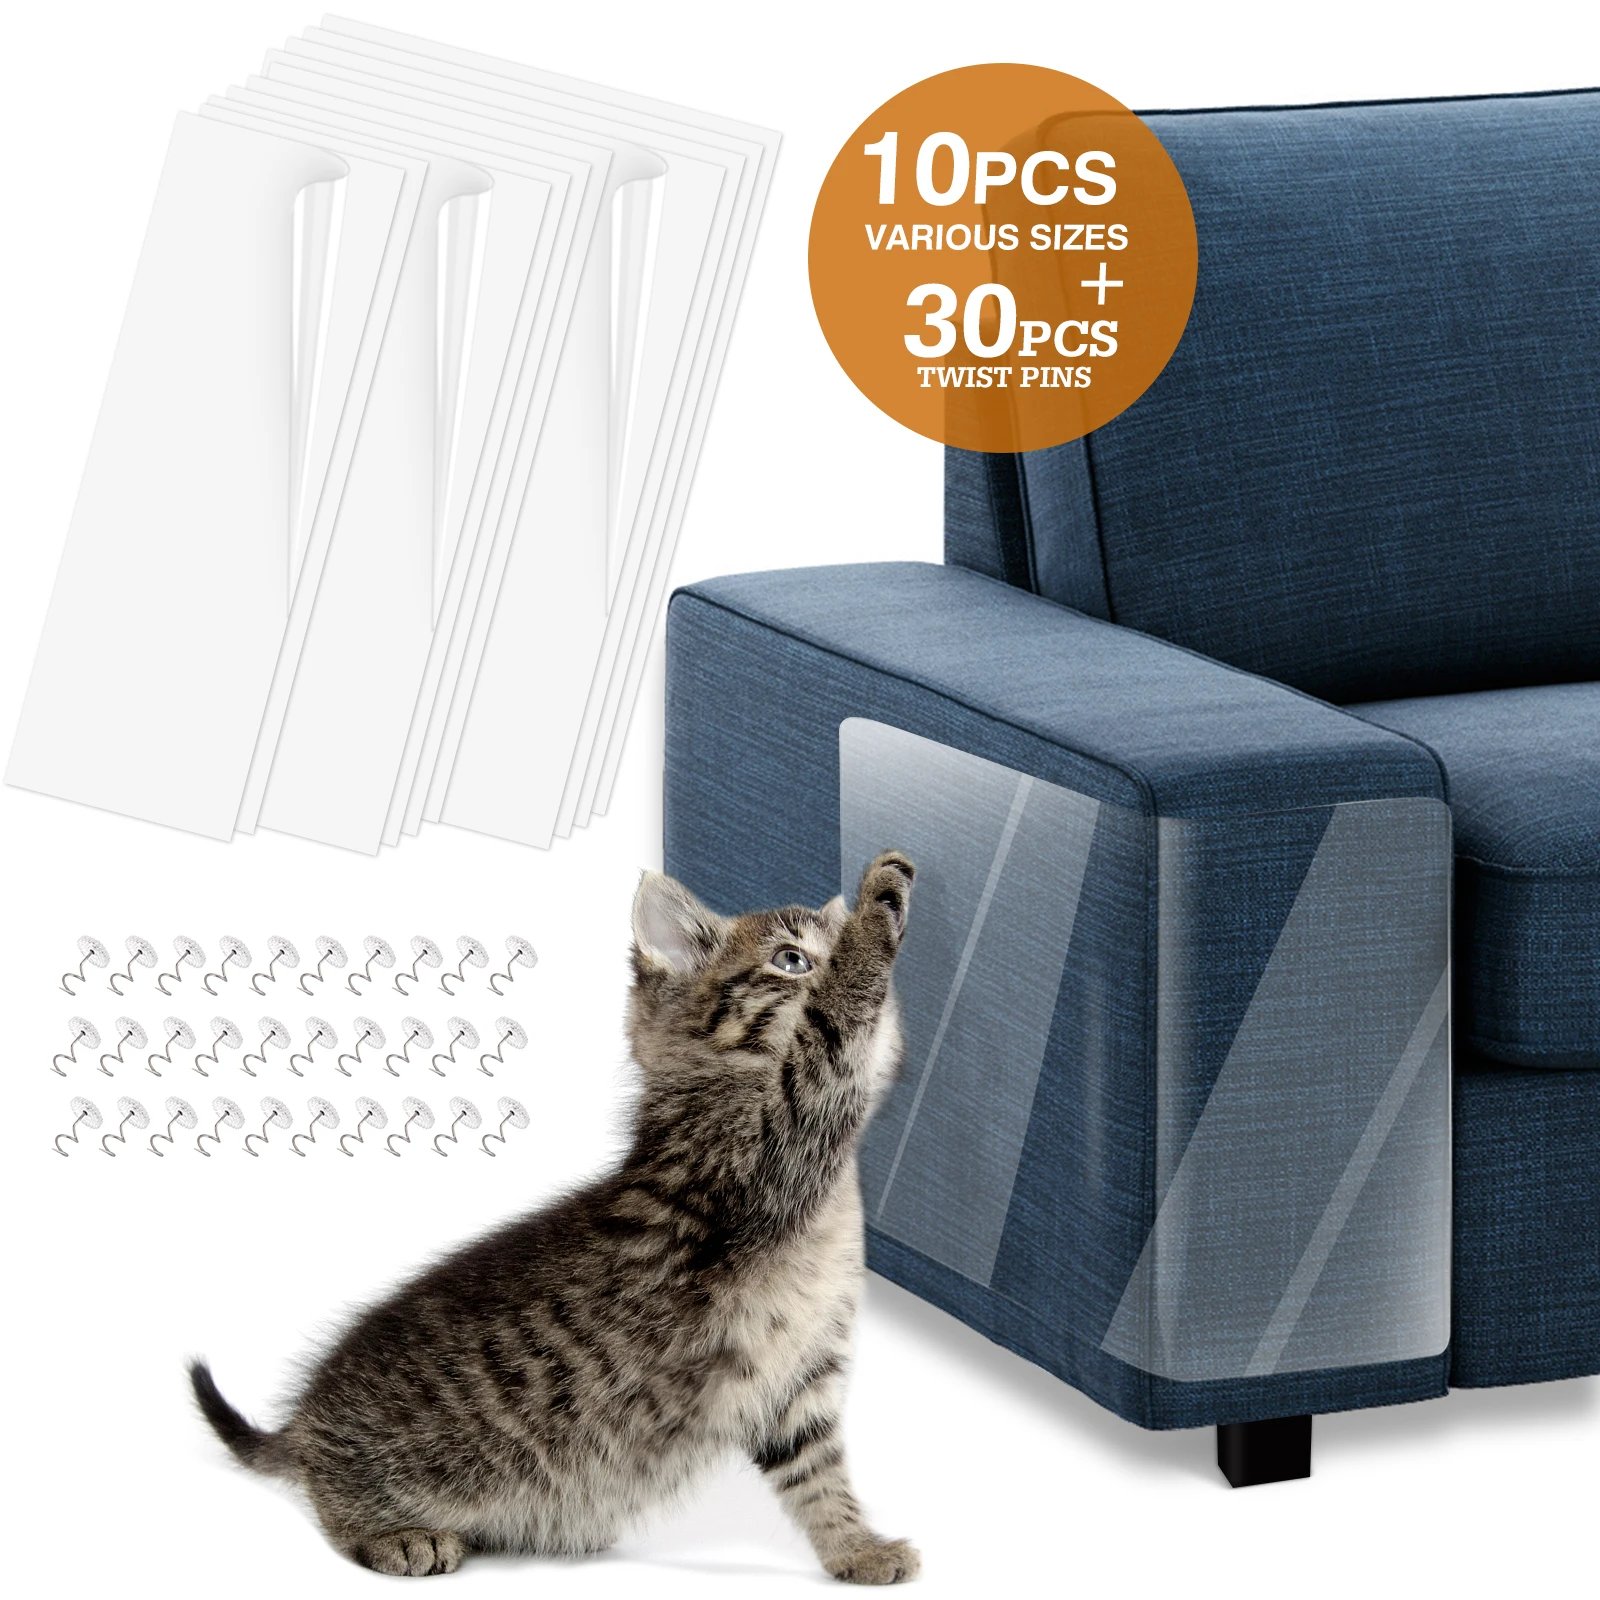 

Vavopaw 10Pcs Cat Anti-Scratch Stickers, Cat Furniture Couch Protector for Protecting Your Upholstered Furniture - White, Transparent